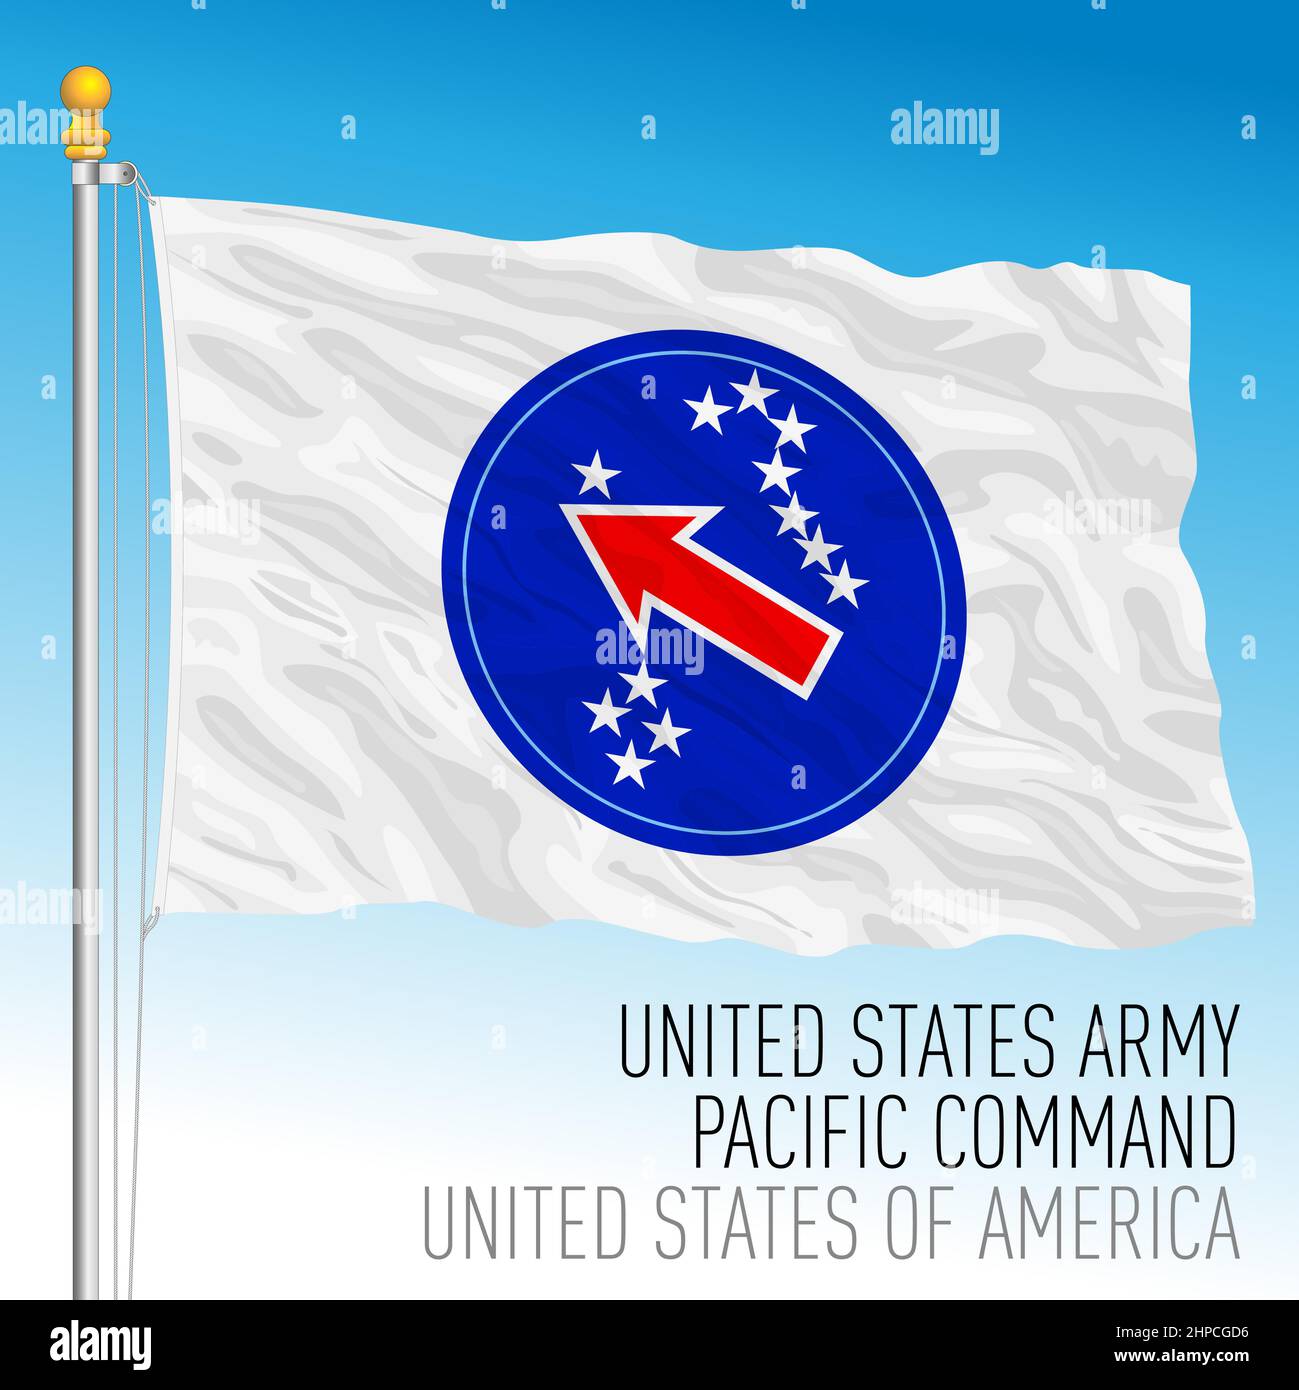 United States Army Pacific Command flag, USA, illustrazione vettoriale Illustrazione Vettoriale